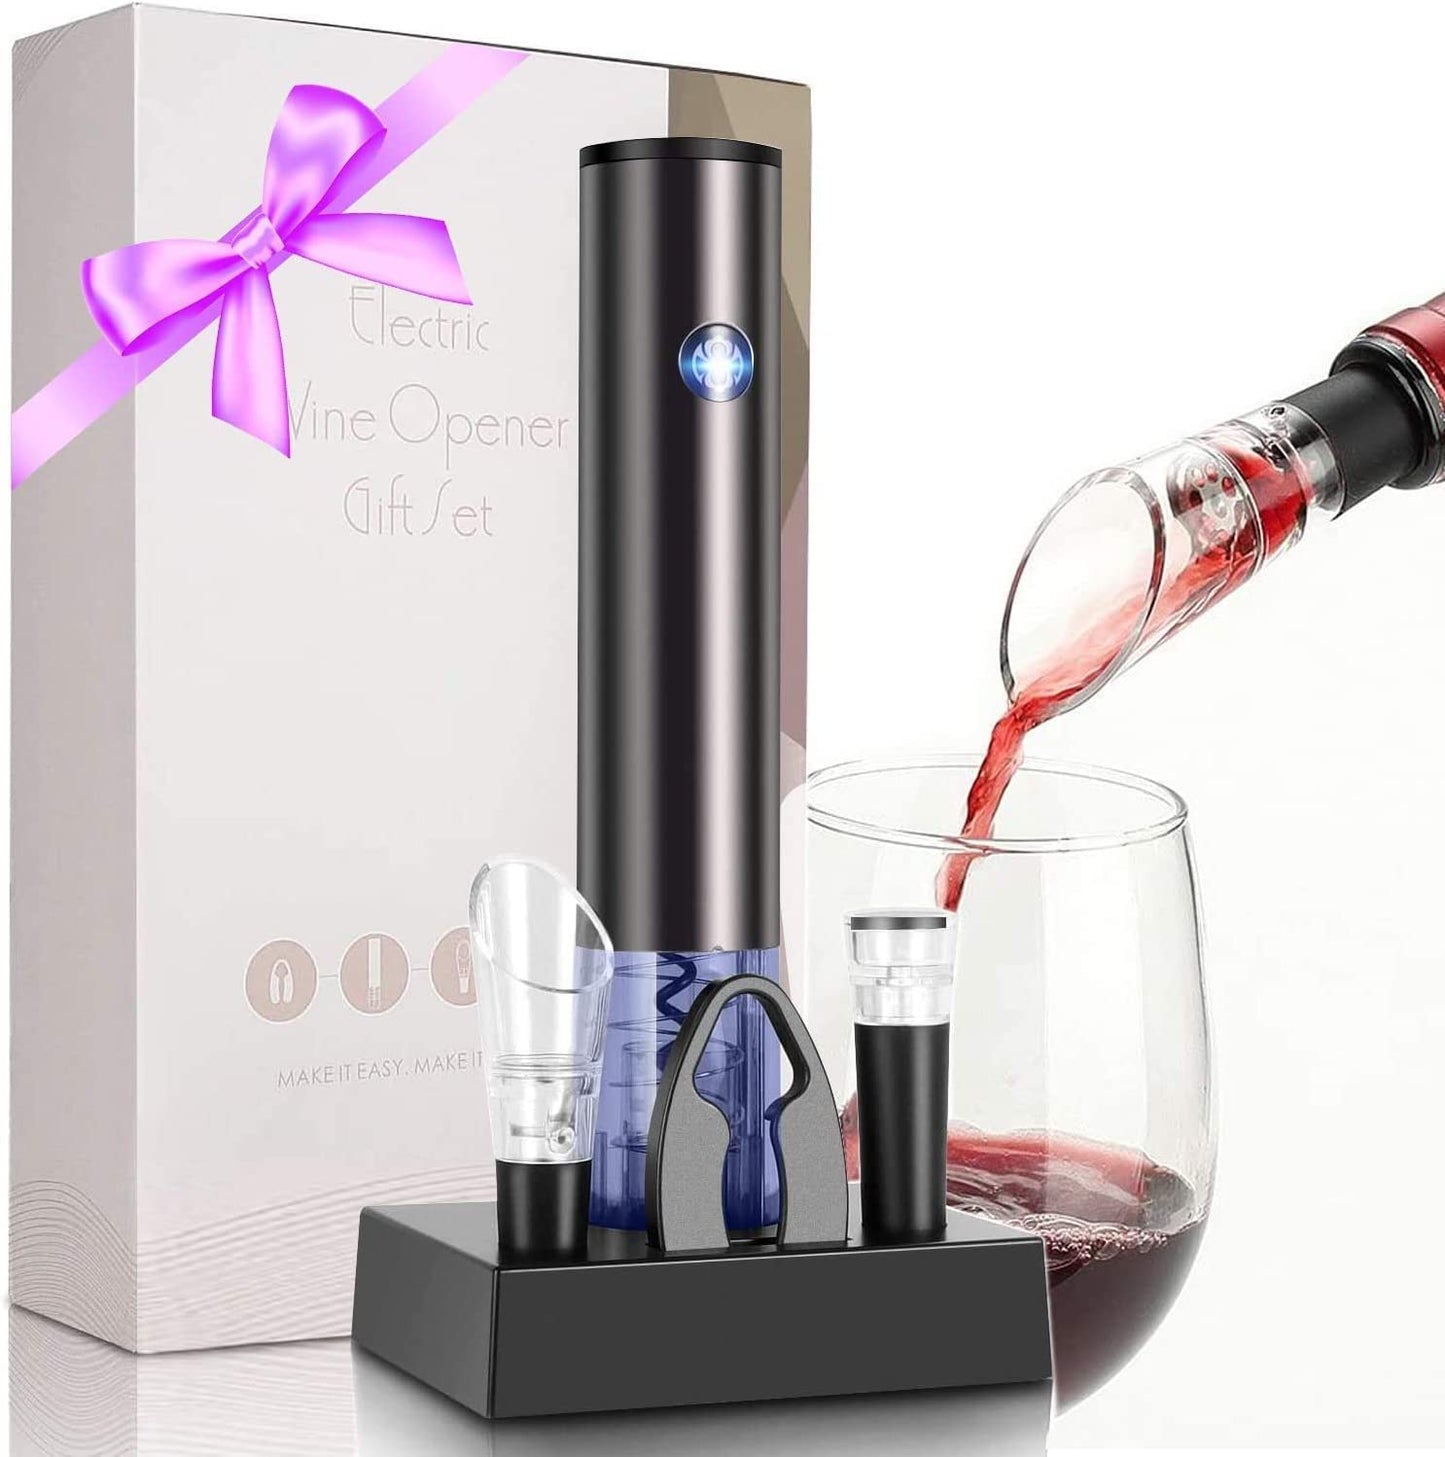 Wine Aerator Electric Wine Decanter Best Sellers One Touch Red -White Wine Accessories Aeration Work with Wine Opener for Beginner Enthusiast - Spout Pourer - Wine Preserver